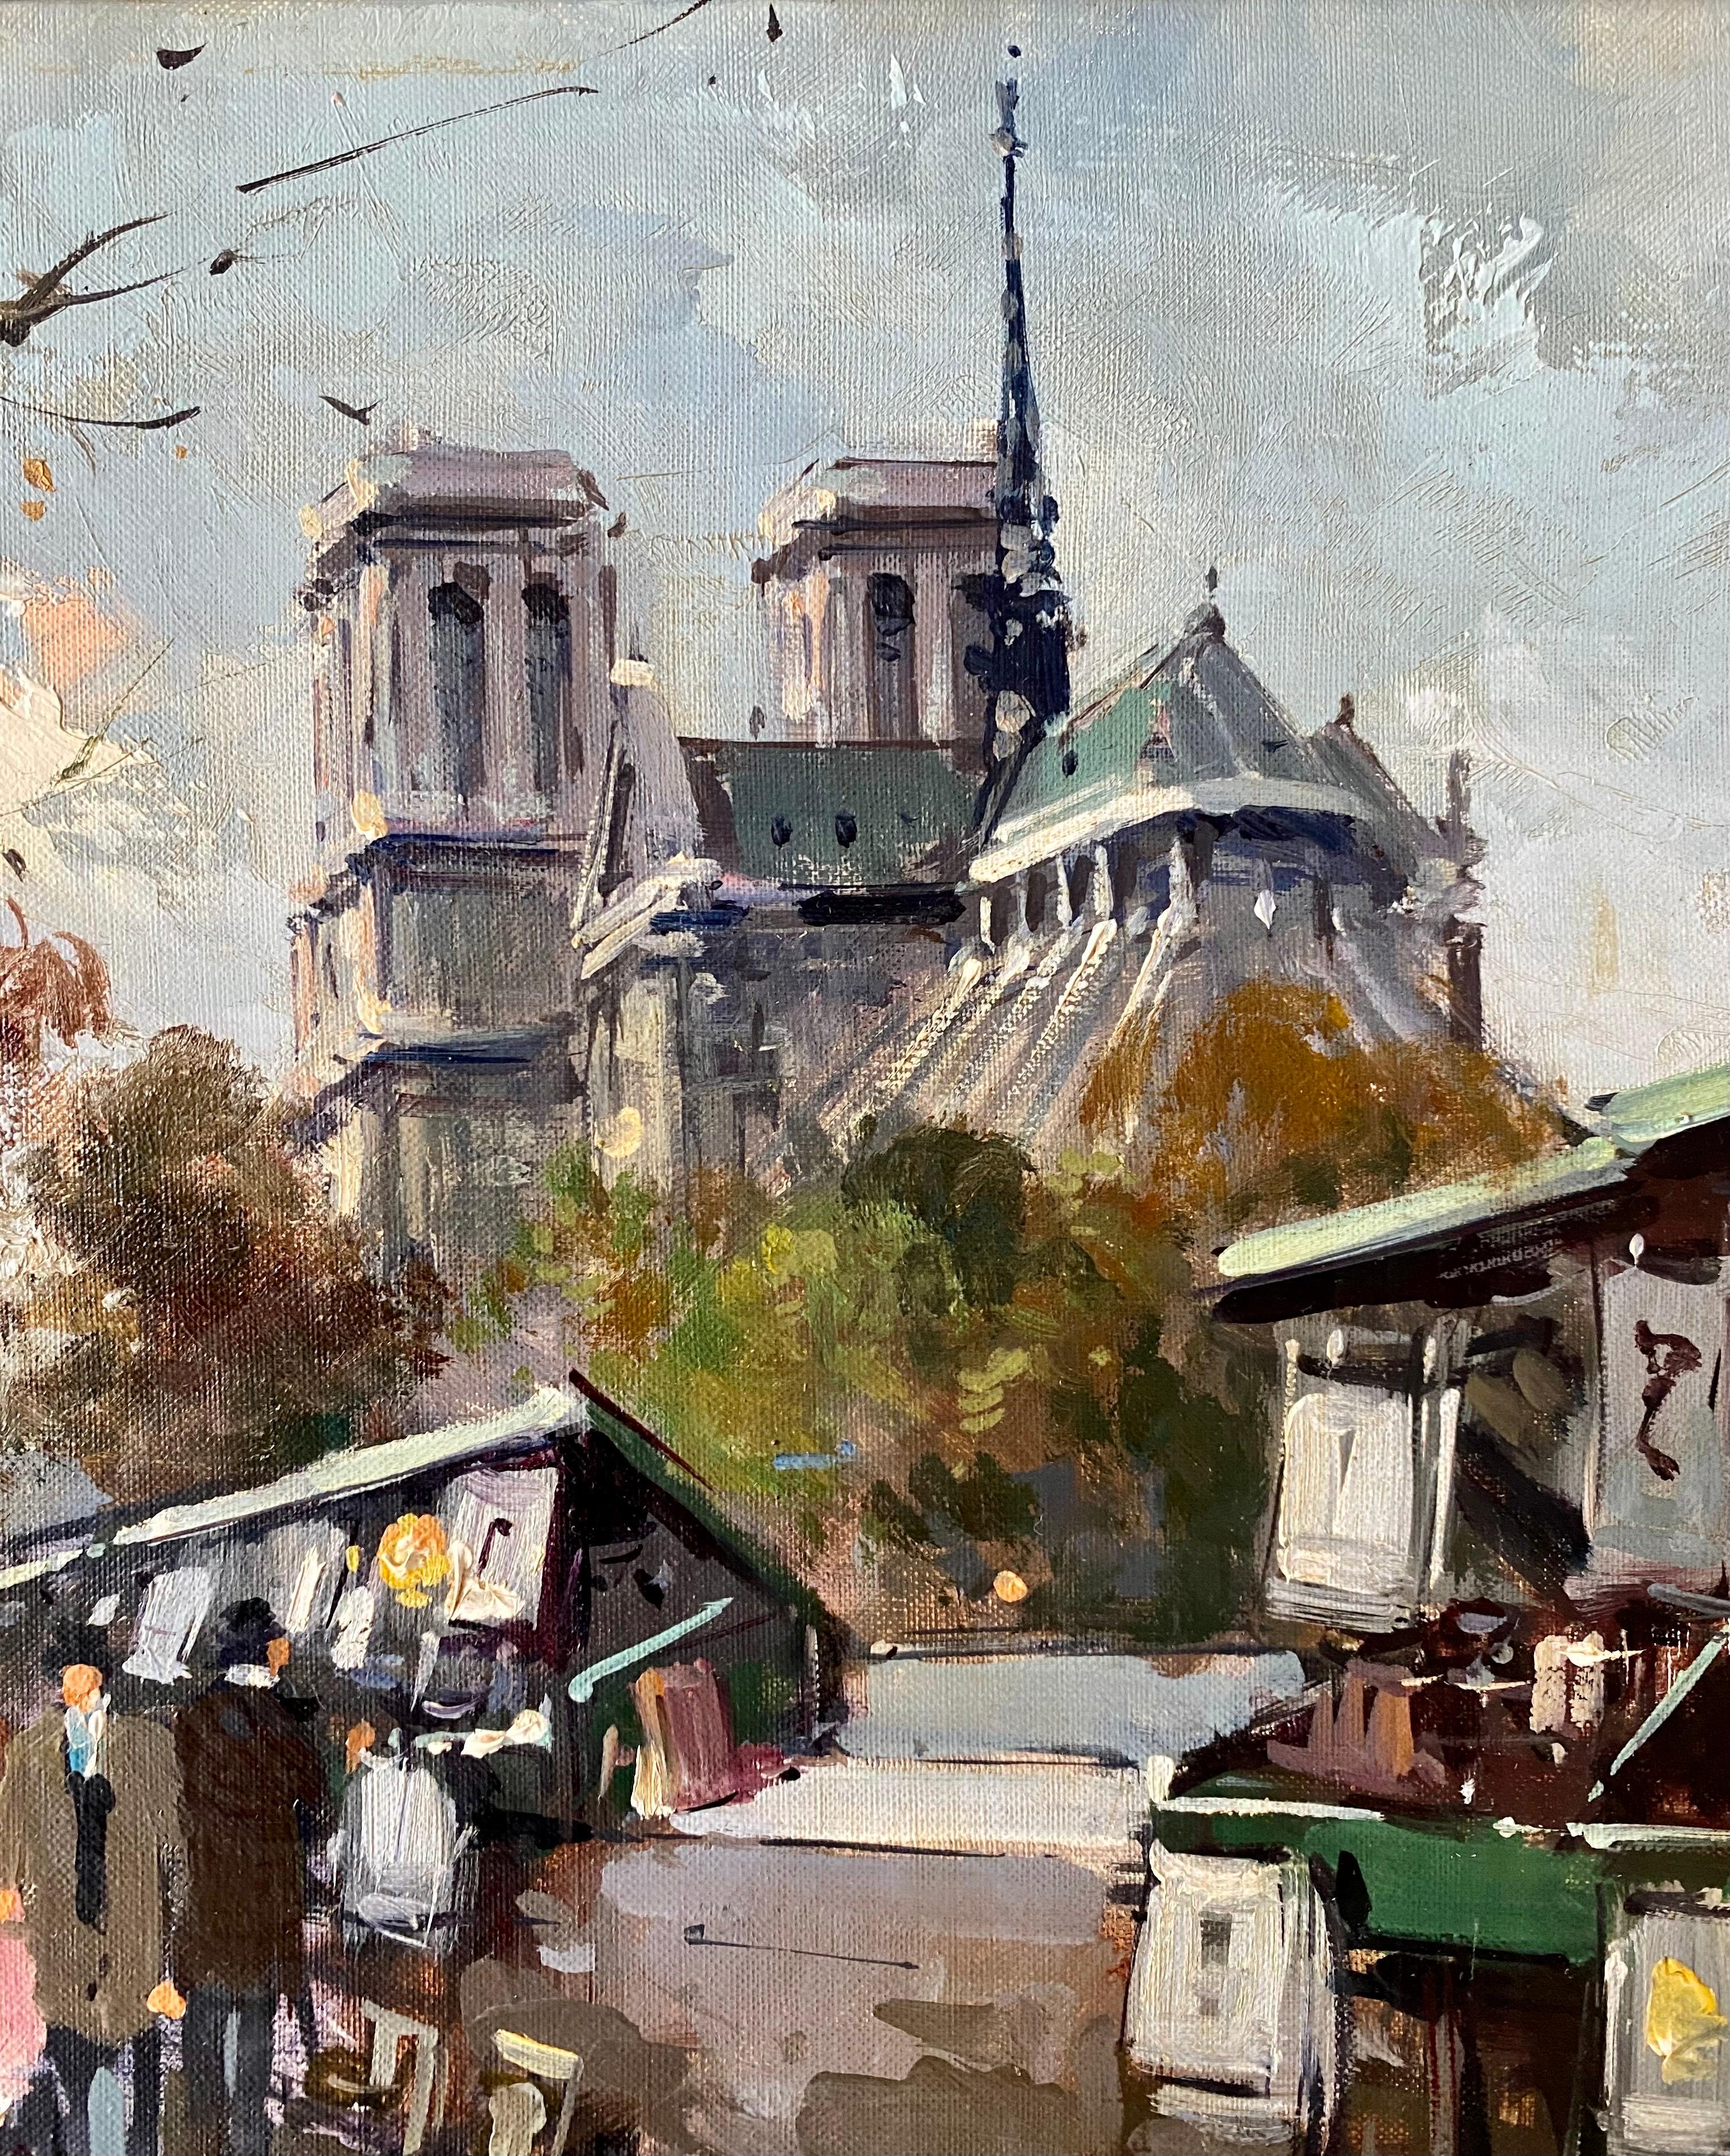 Magnificent French impressionist painting depicting the hustle and bustle of a busy Parisian quai in front of the Notre Dame, with the iconic bouquinistes visible to the right, in the style of the late 19th century. 

French artist Octave Guilbert